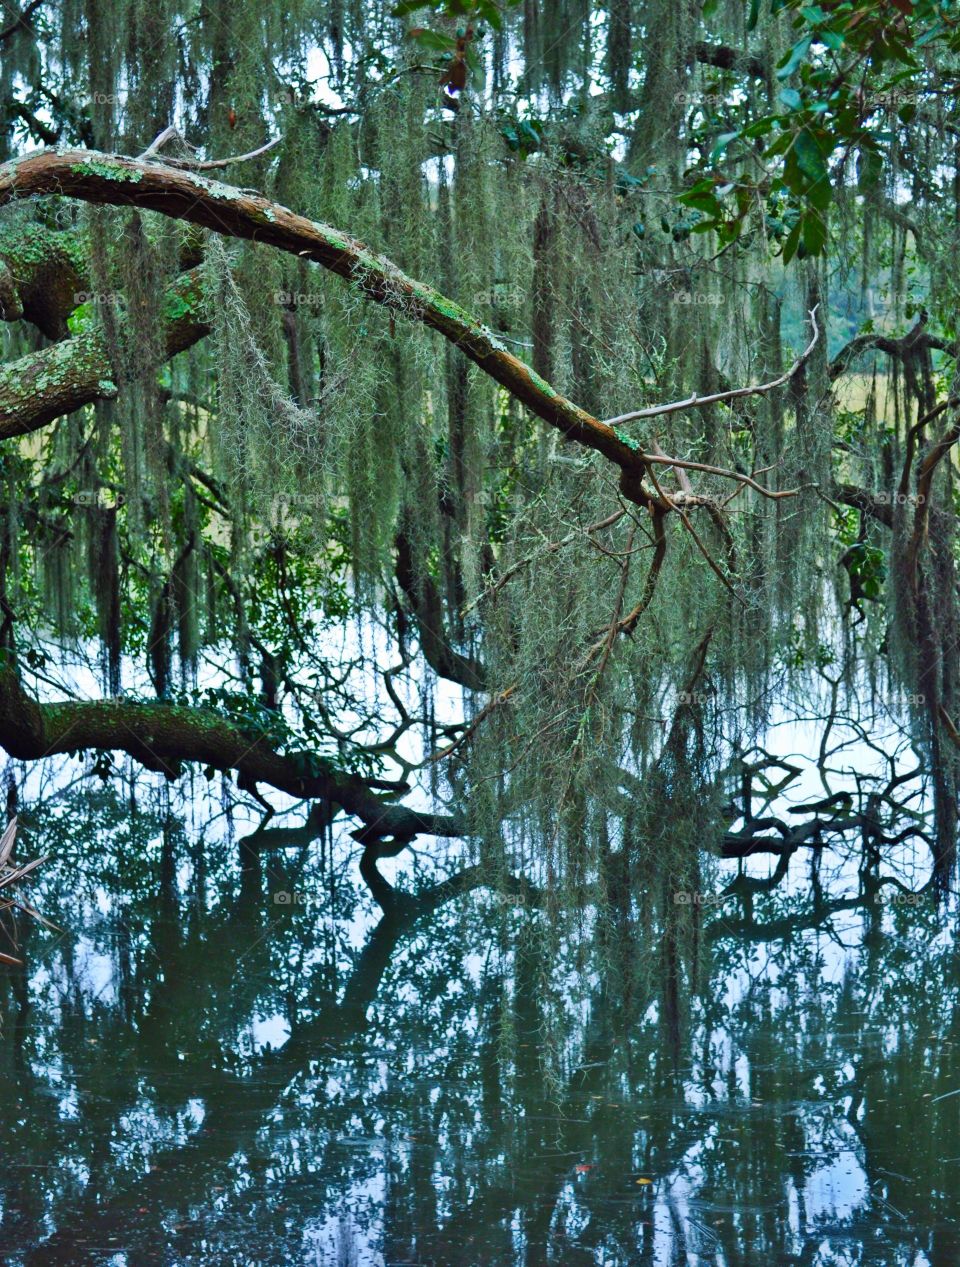 Reflection of old tree in water